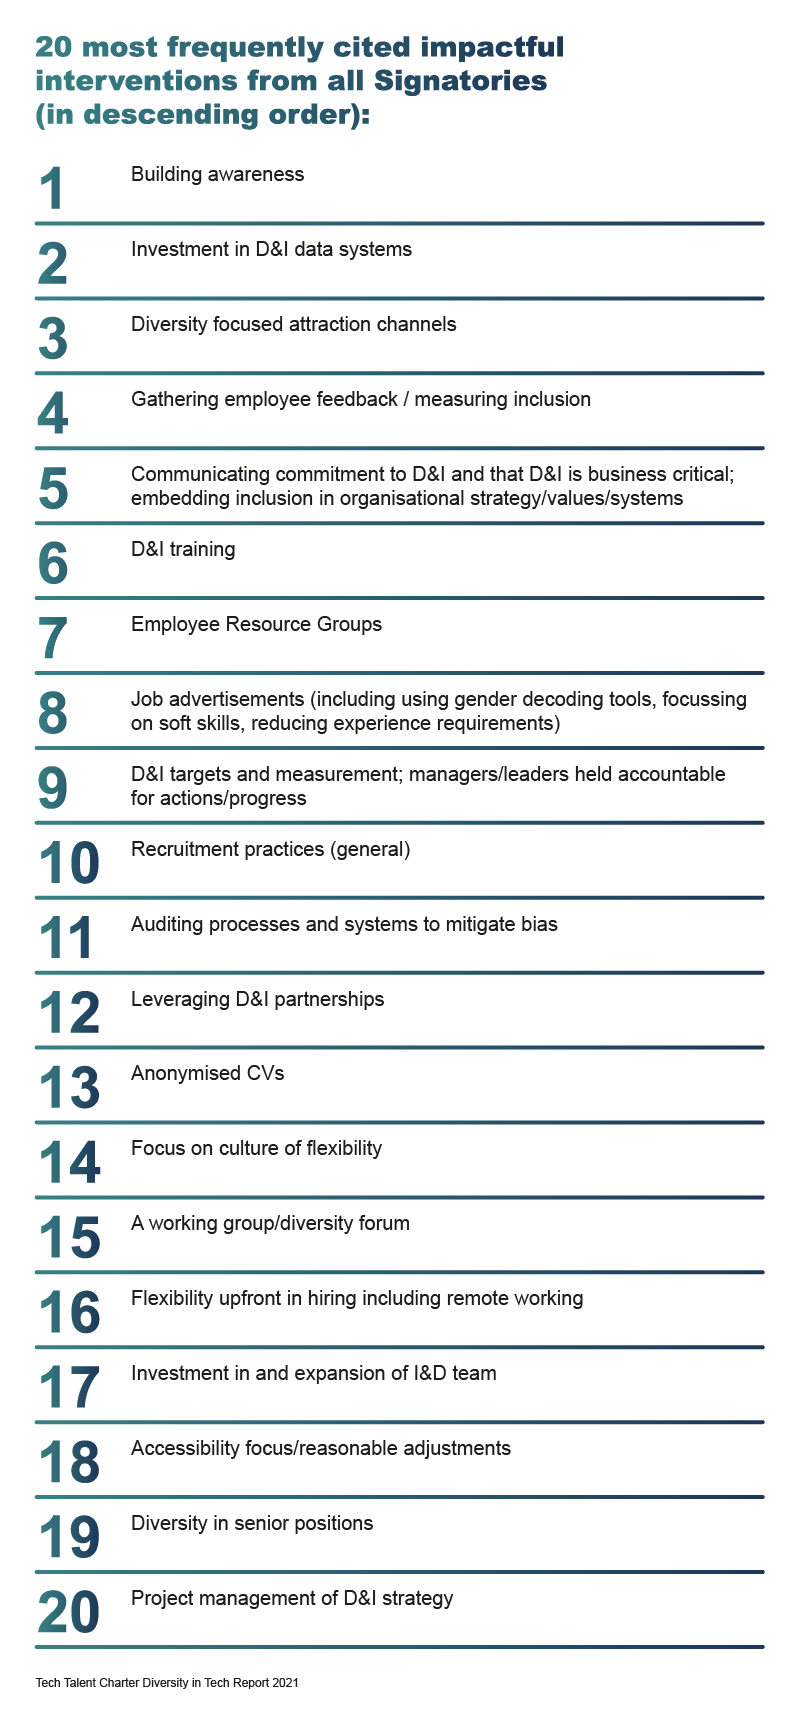 20 most frequently cited impactful interventions from all Signatories Ref_21